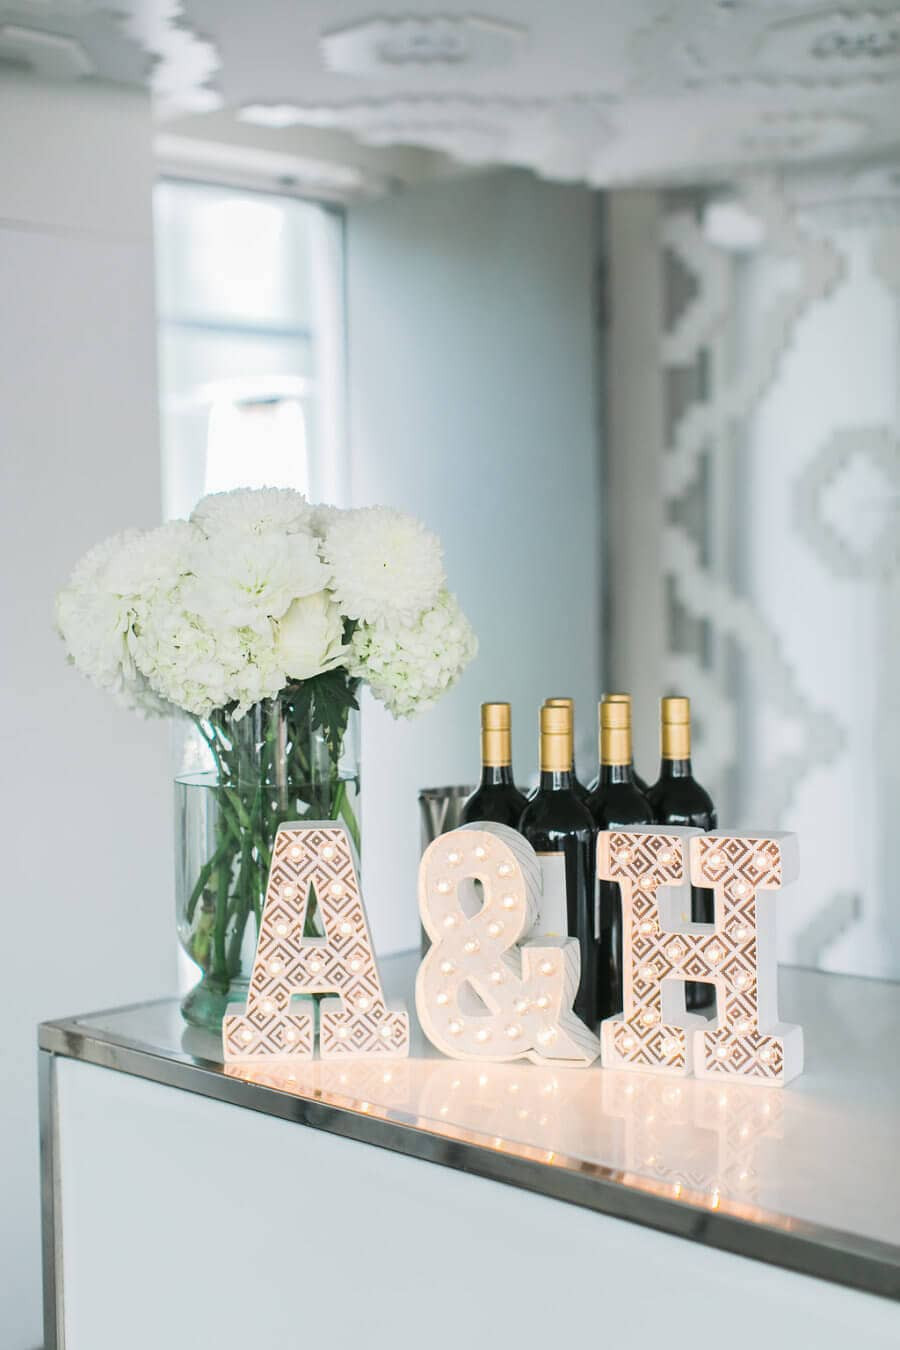 Engagement Party Themes Ideas
 25 Amazing DIY Engagement Party Decoration Ideas for 2020